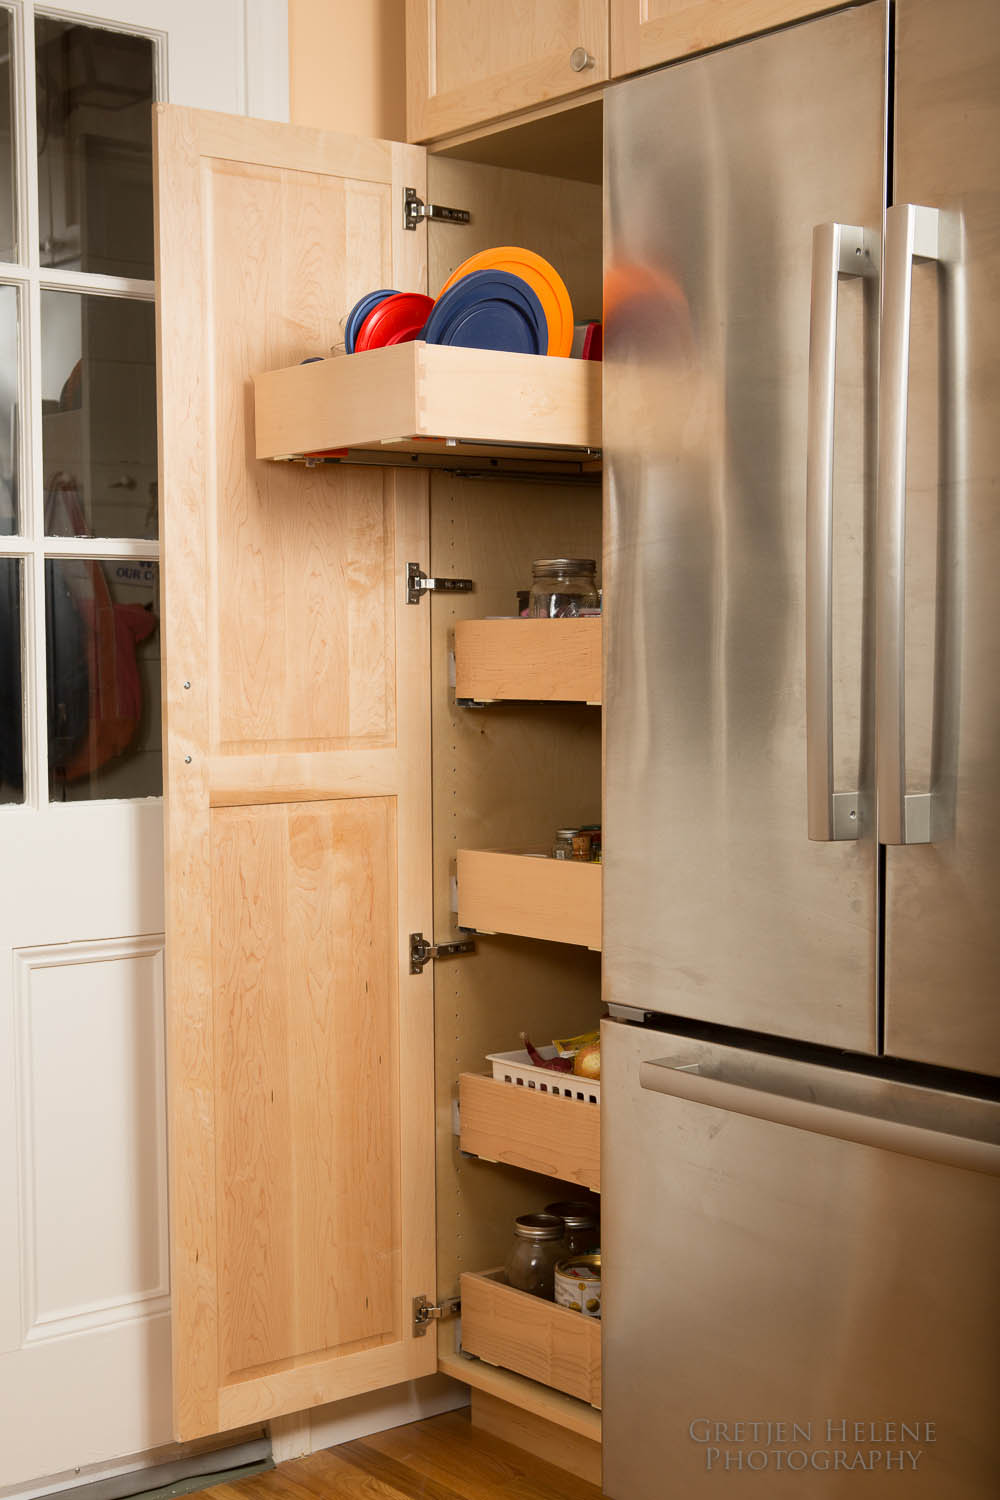 Pantry cabinet with pullouts adds storage